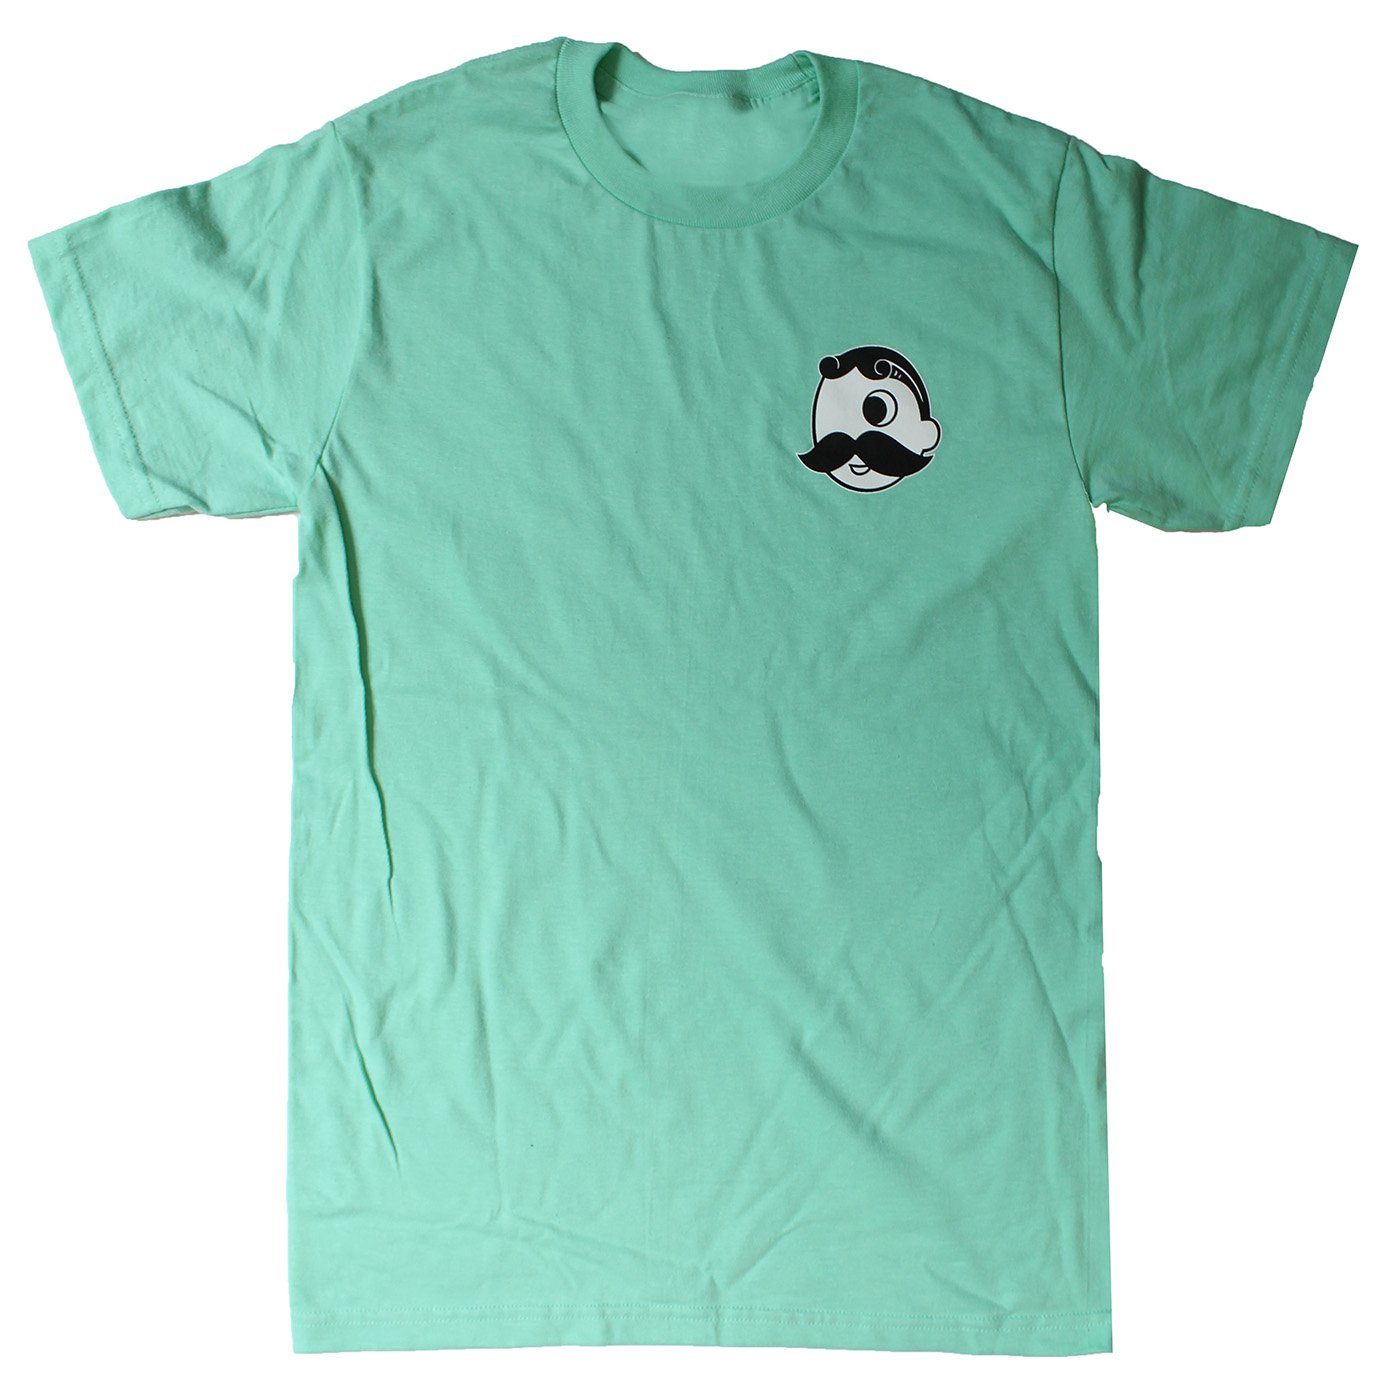 Natty Boh Lifeguard Stand (Island Reef) / Shirt - Route One Apparel